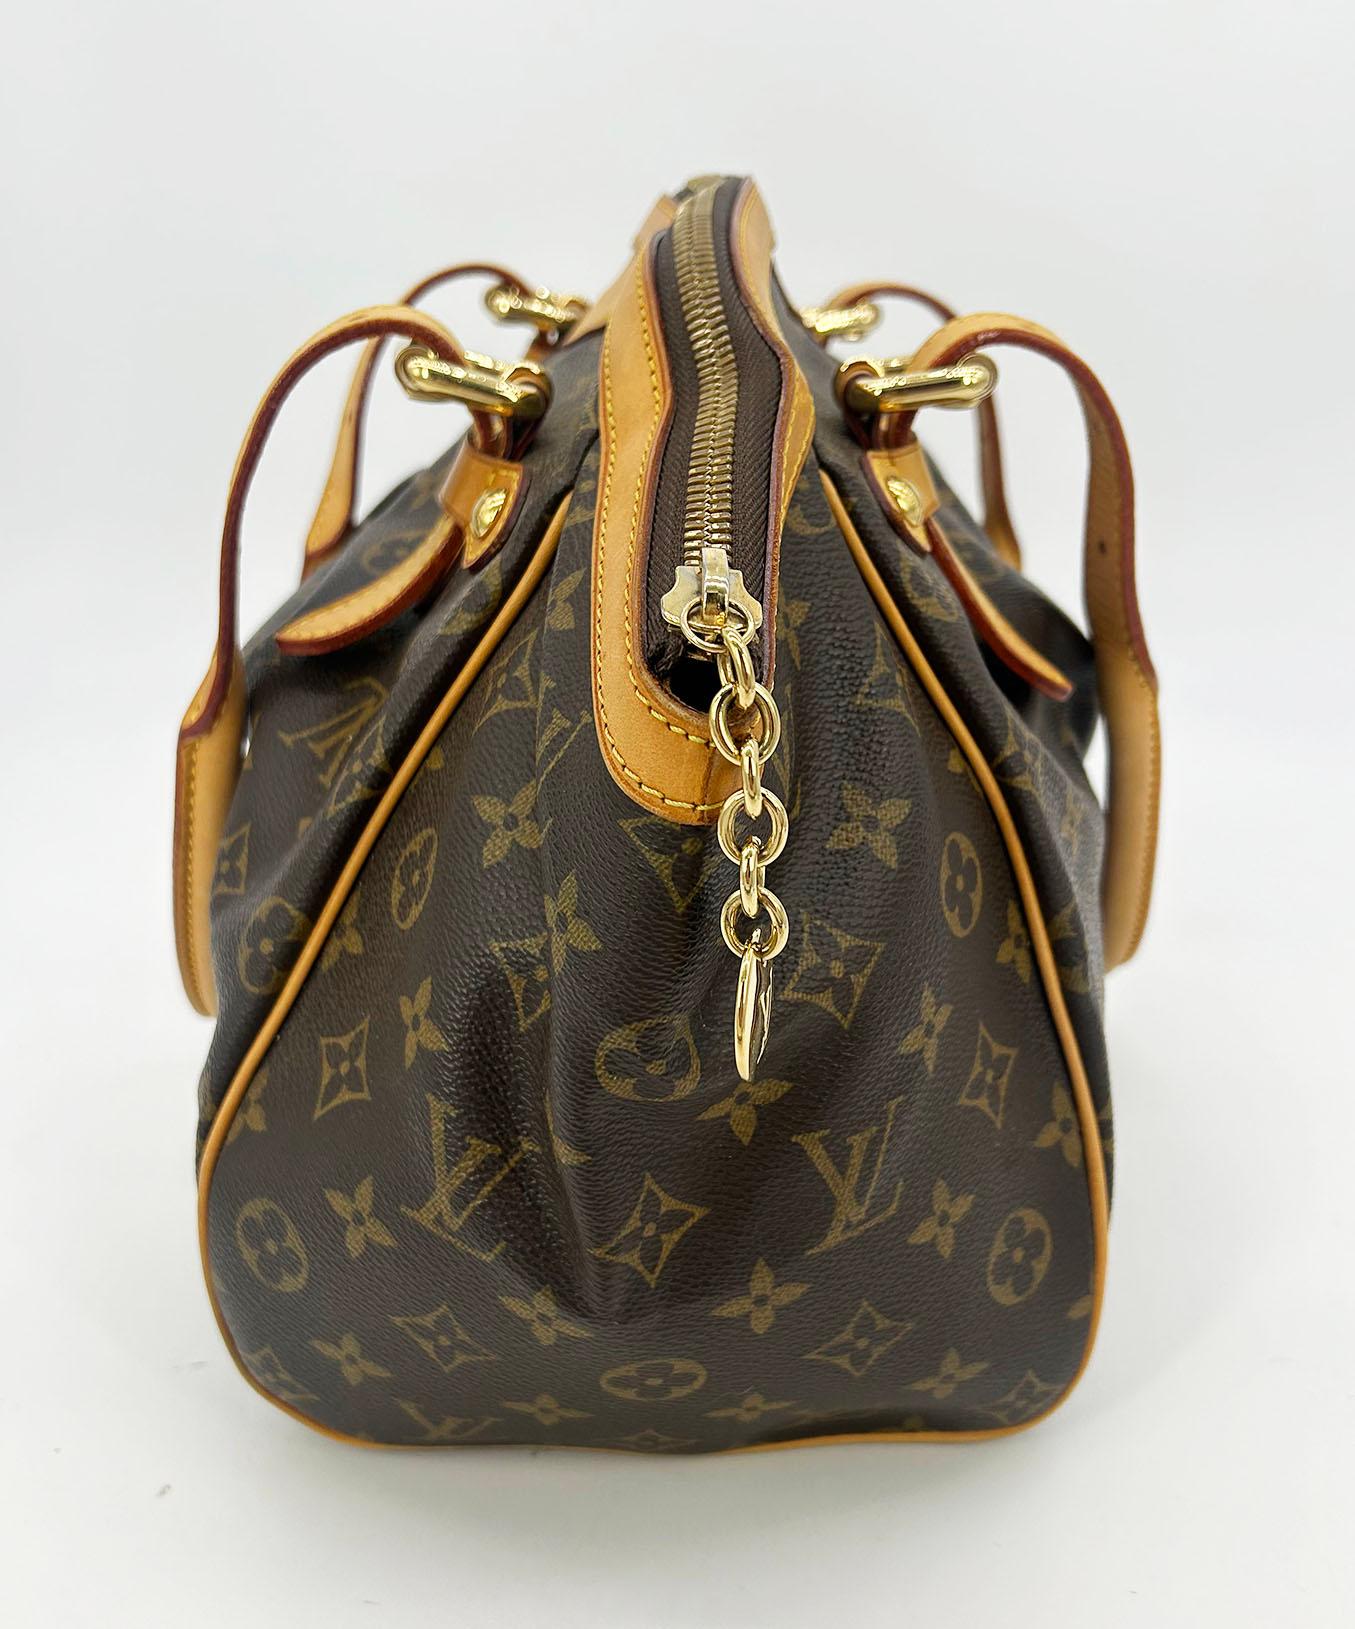 Louis Vuitton Monogram Tivoli GM in very good condition. Signature monogram canvas exterior trimmed with tan leather and gold hardware. Unique double top handle design with adjustable buckles at each end can be worn as a shoulder bag or carried by